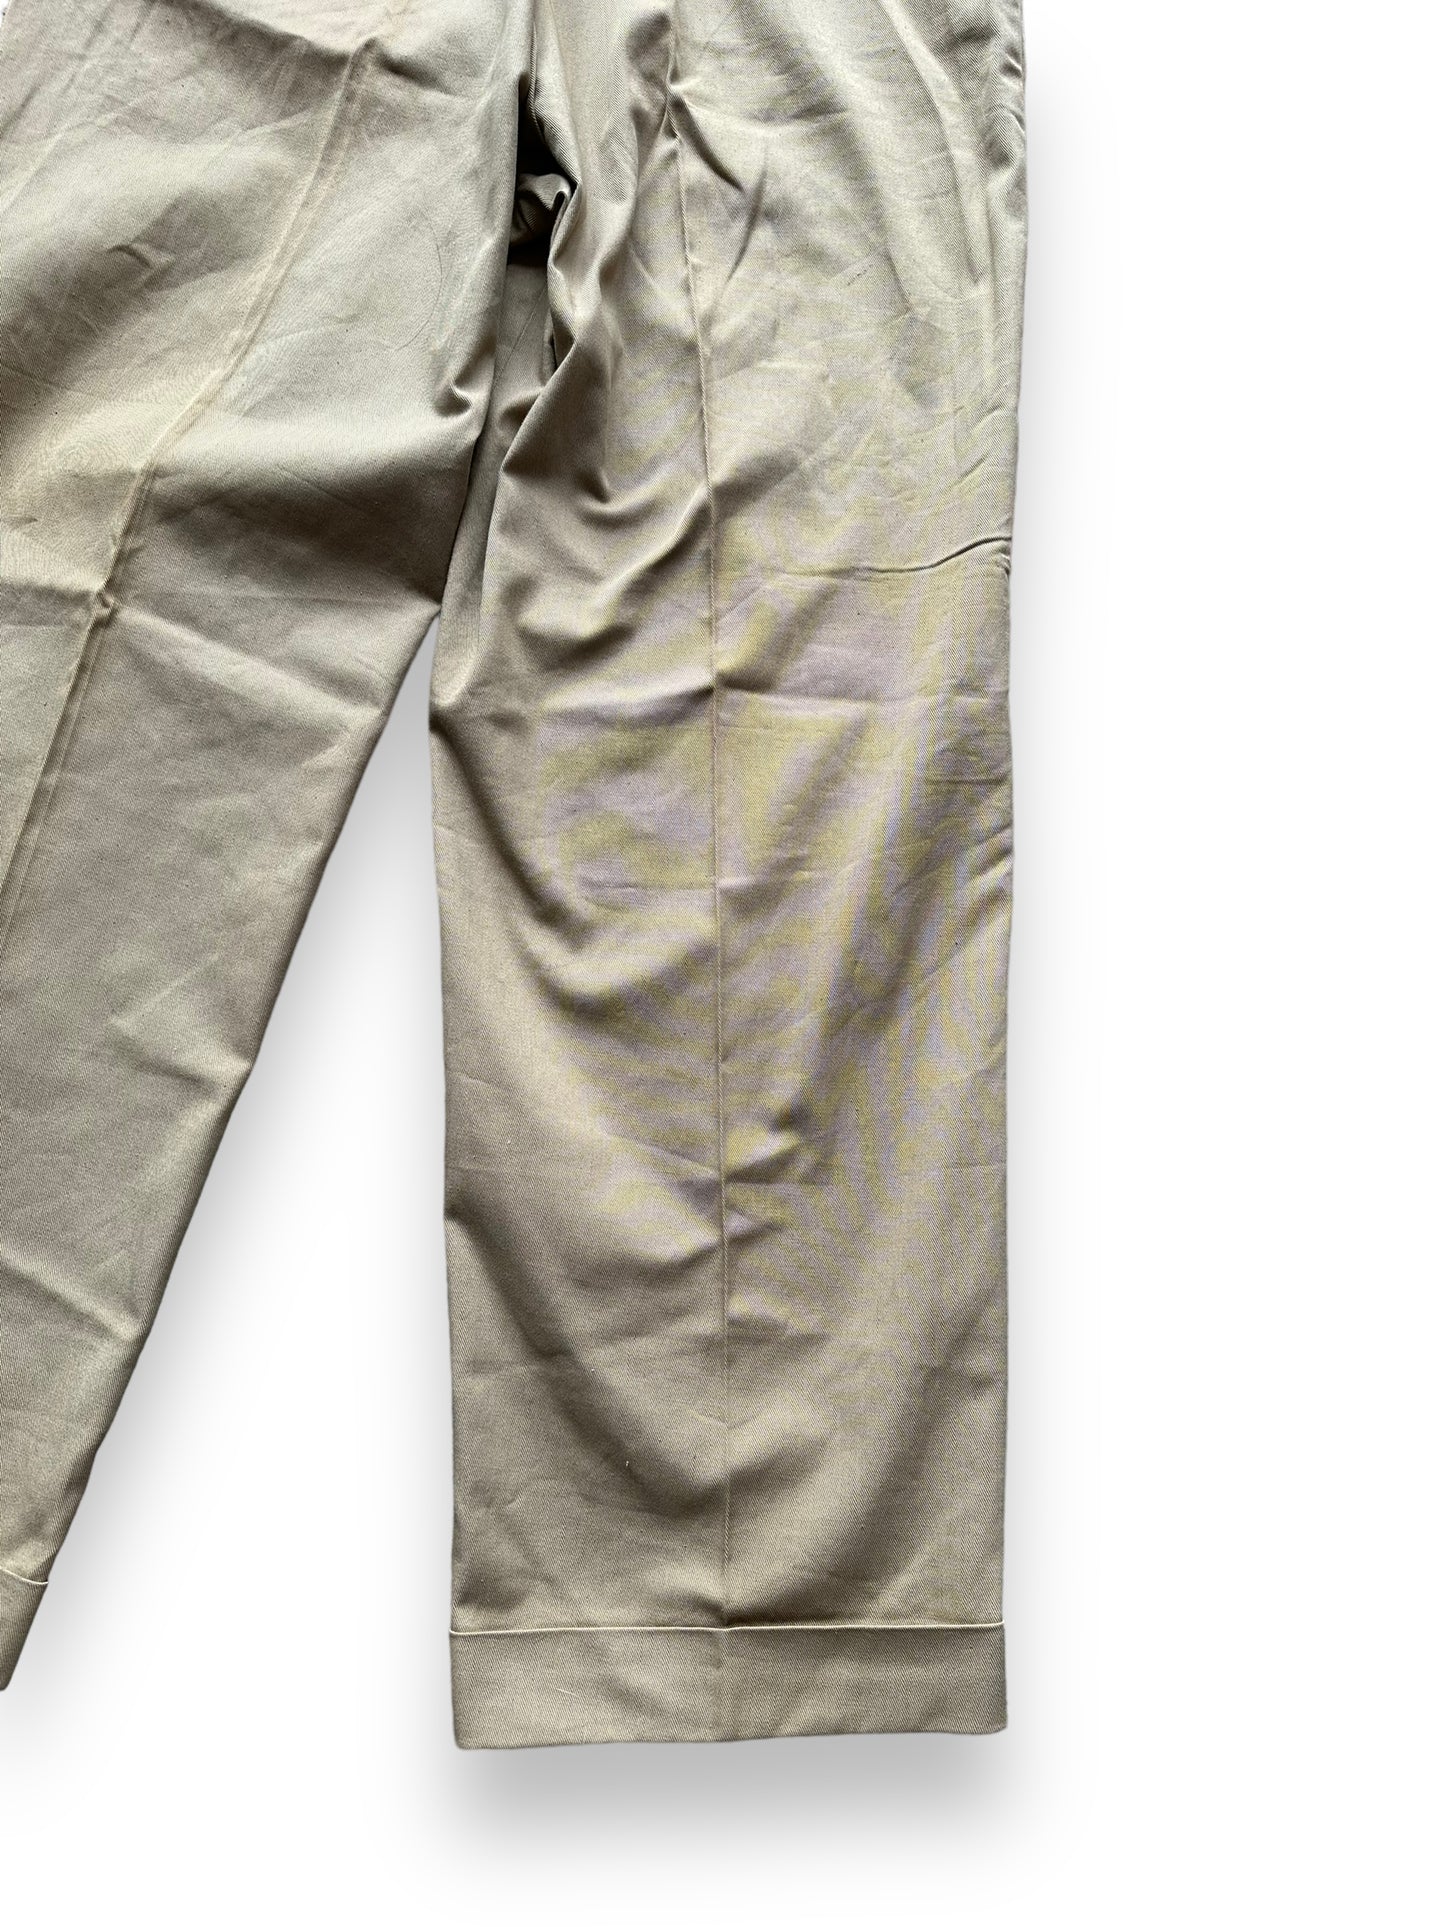 Back right leg on Vintage Deadstock Big Ben Military Chinos 32 x 30 | Barn Owl Vintage Seattle | Vintage Military Seattle